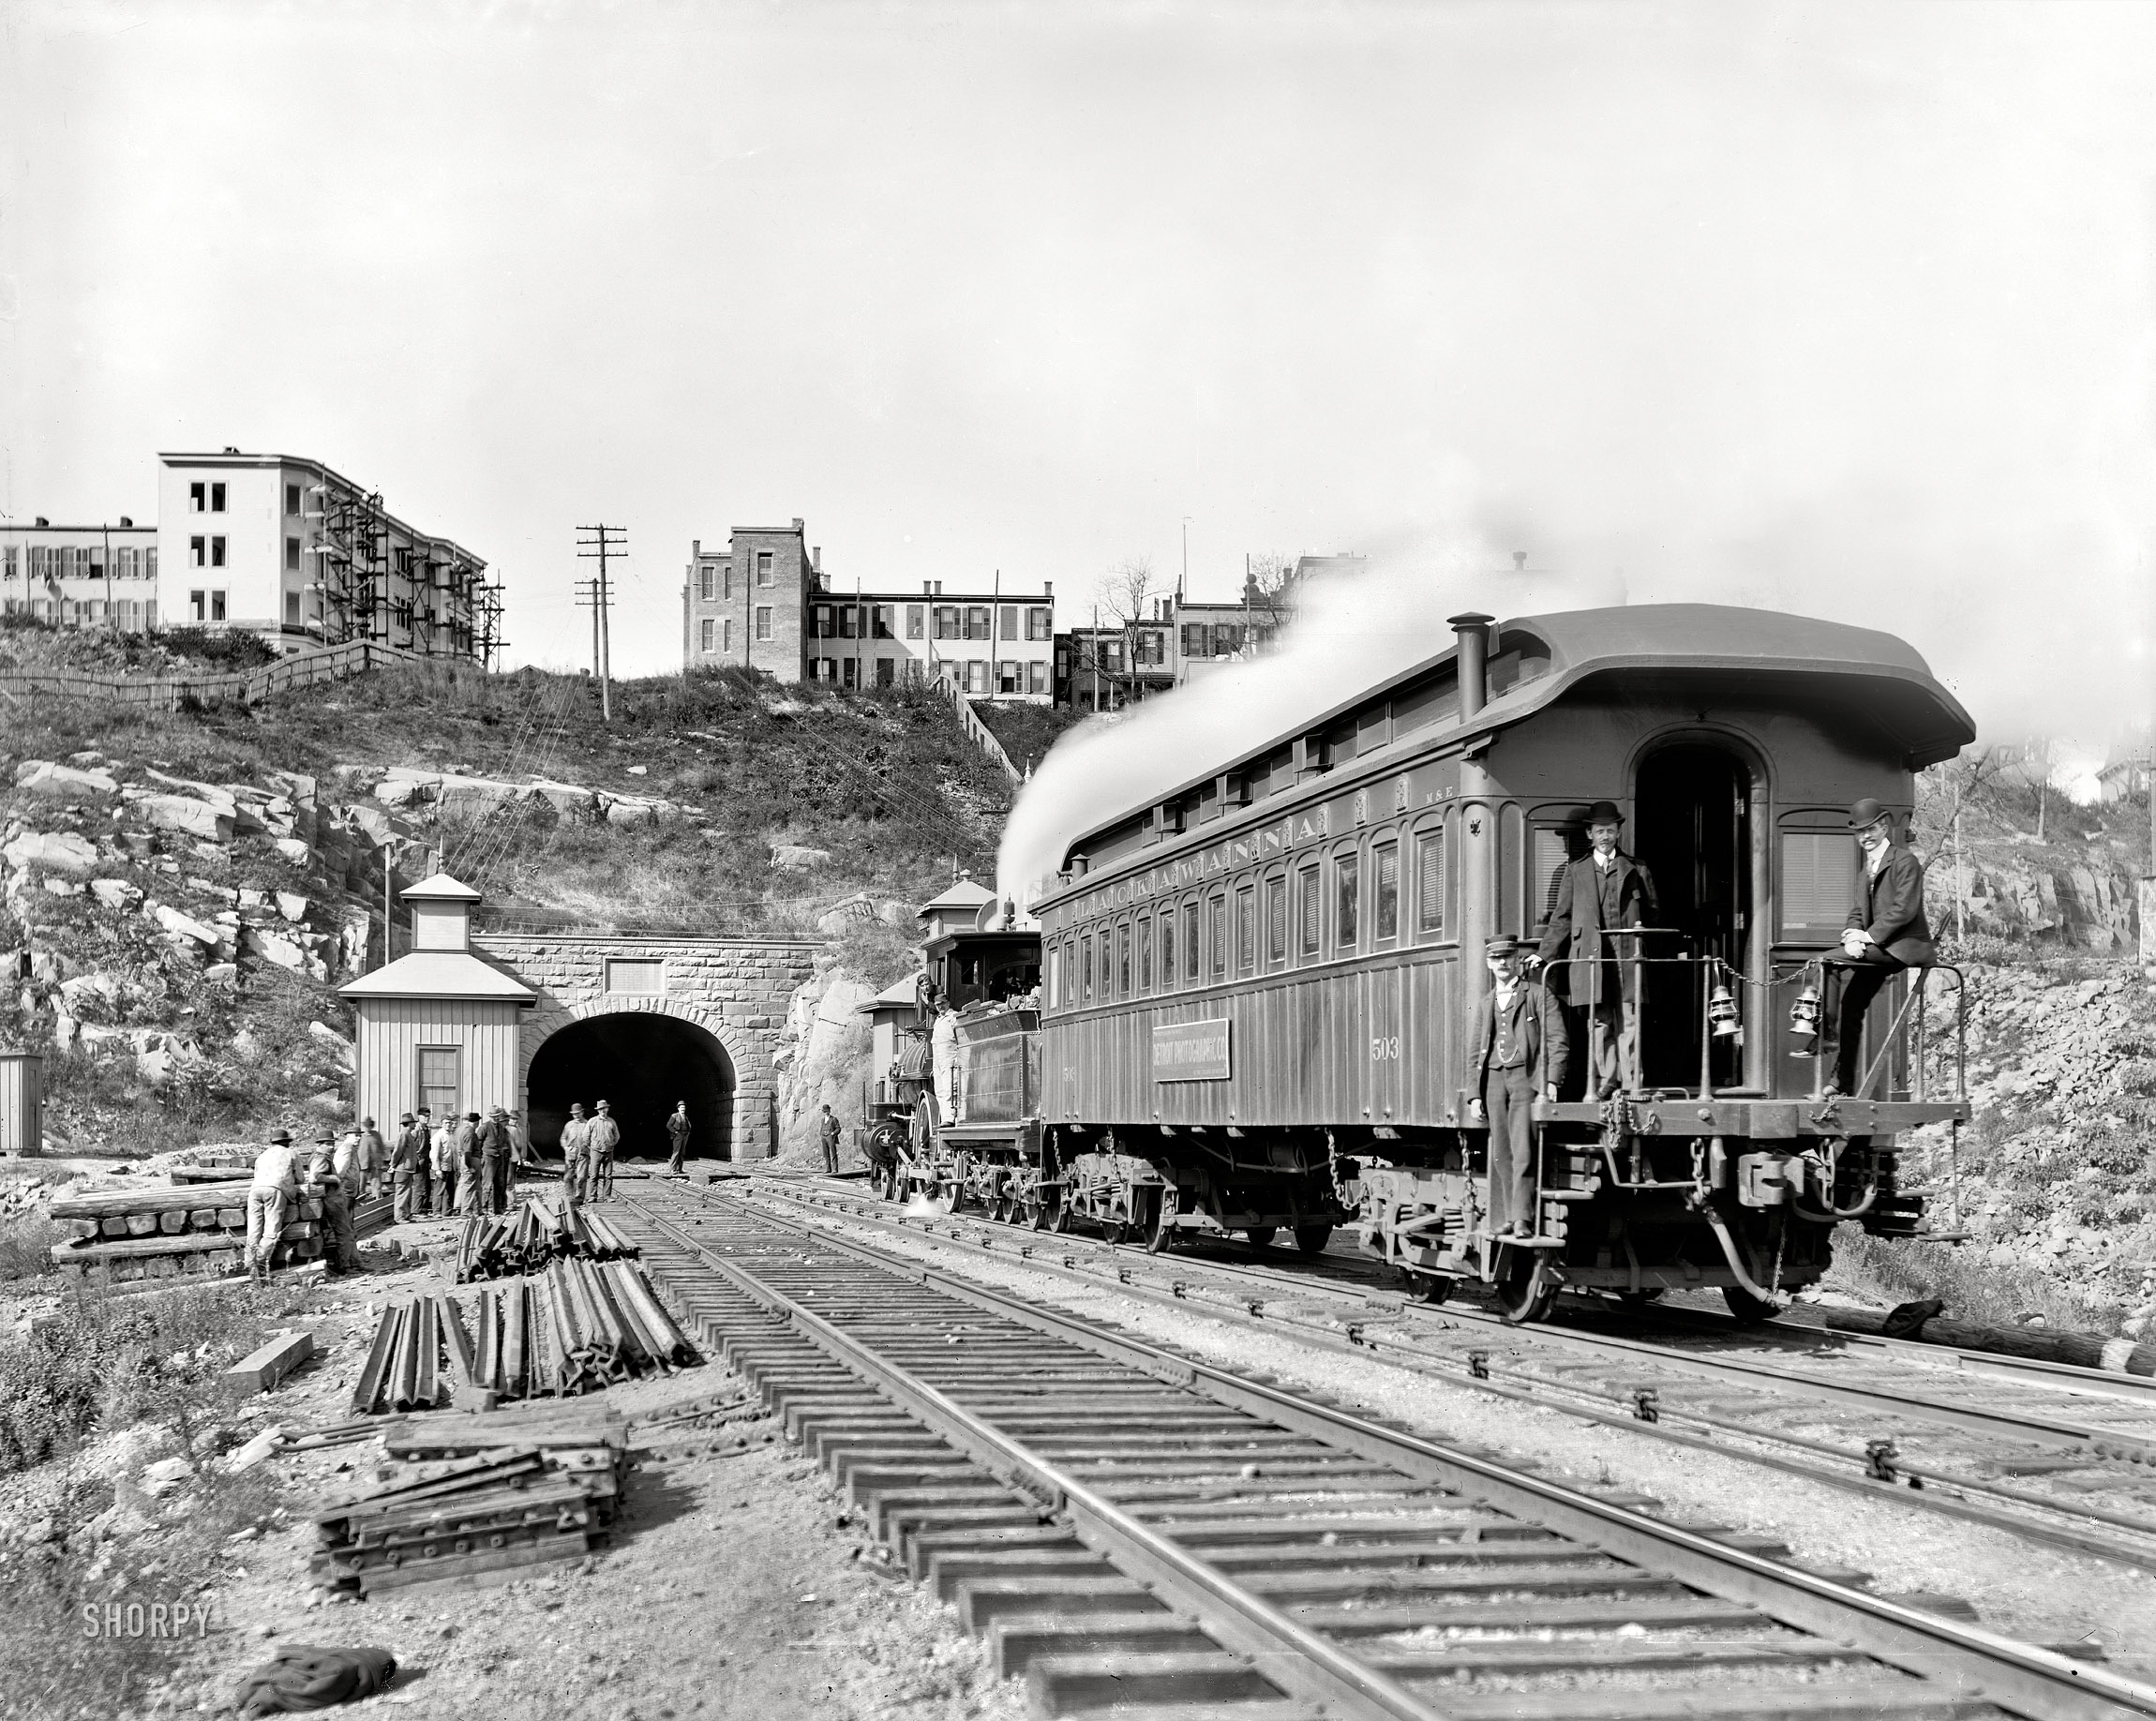 New Jersey circa 1900. "Bergen Tunnel, east end." The Detroit Photographic Special on the tracks. 8x10 inch dry plate glass negative. View full size.